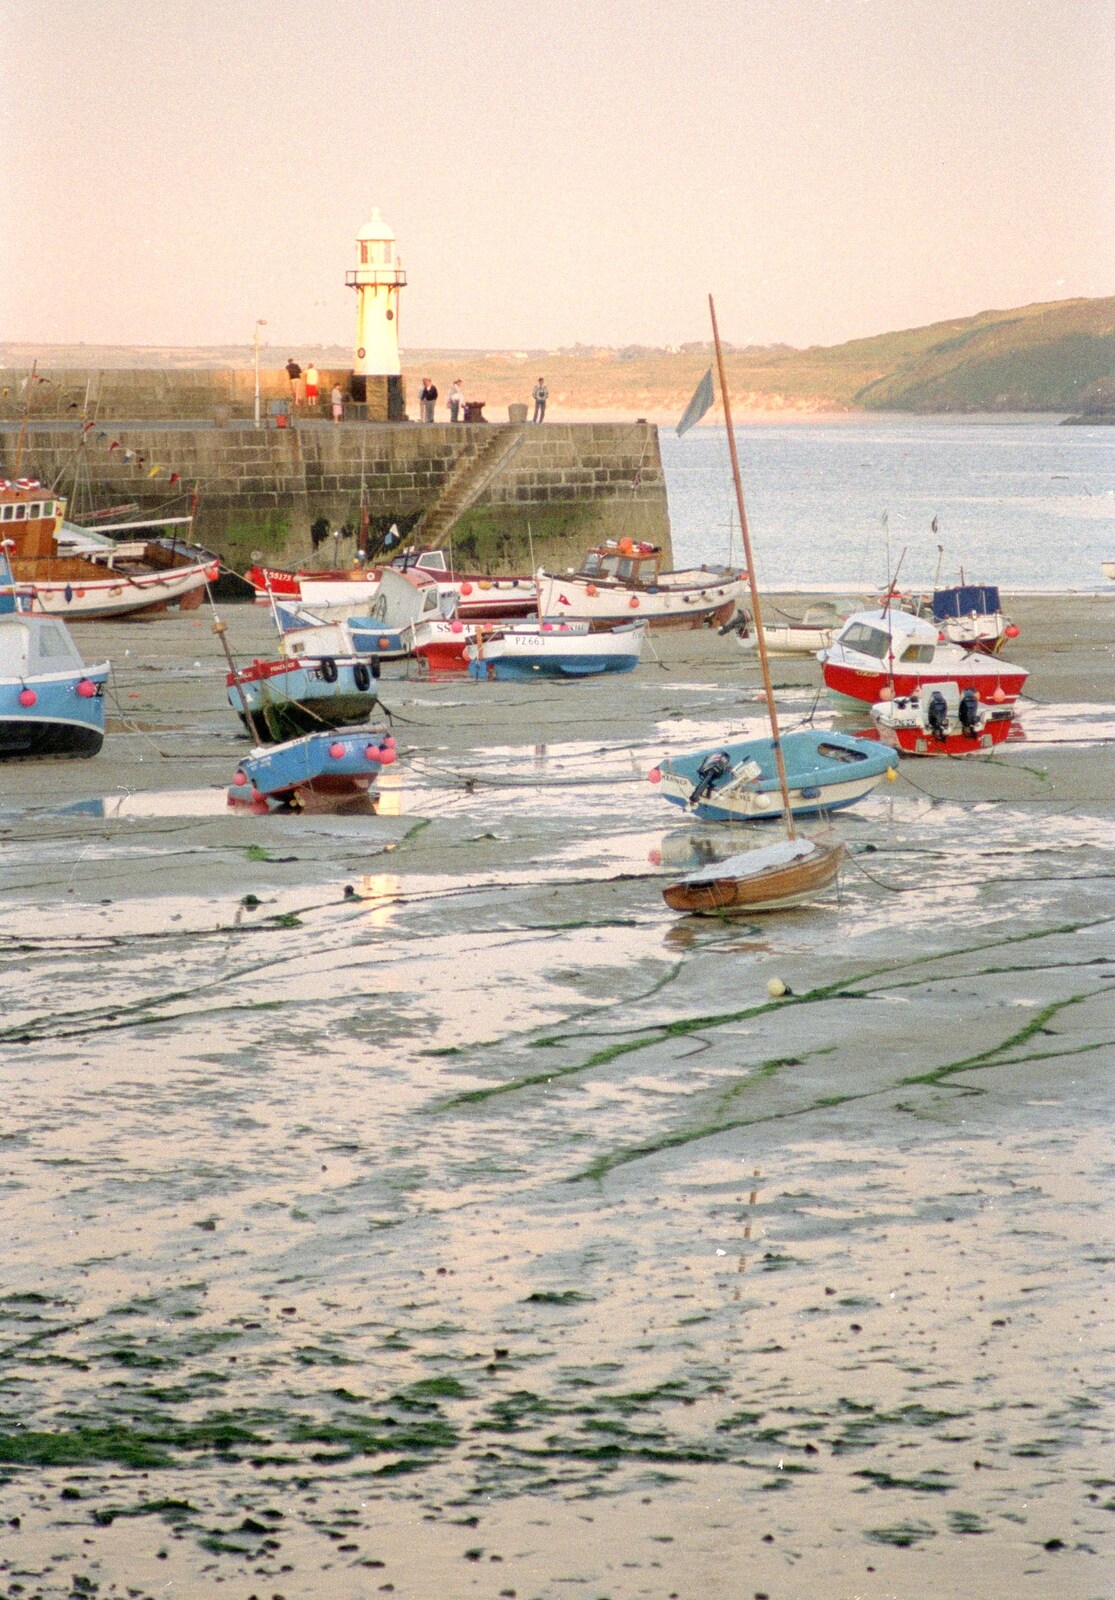 The tide is out, as boats wait on the mud from Uni: An End-of-it-all Trip to Land's End, Cornwall - 13th June 1989